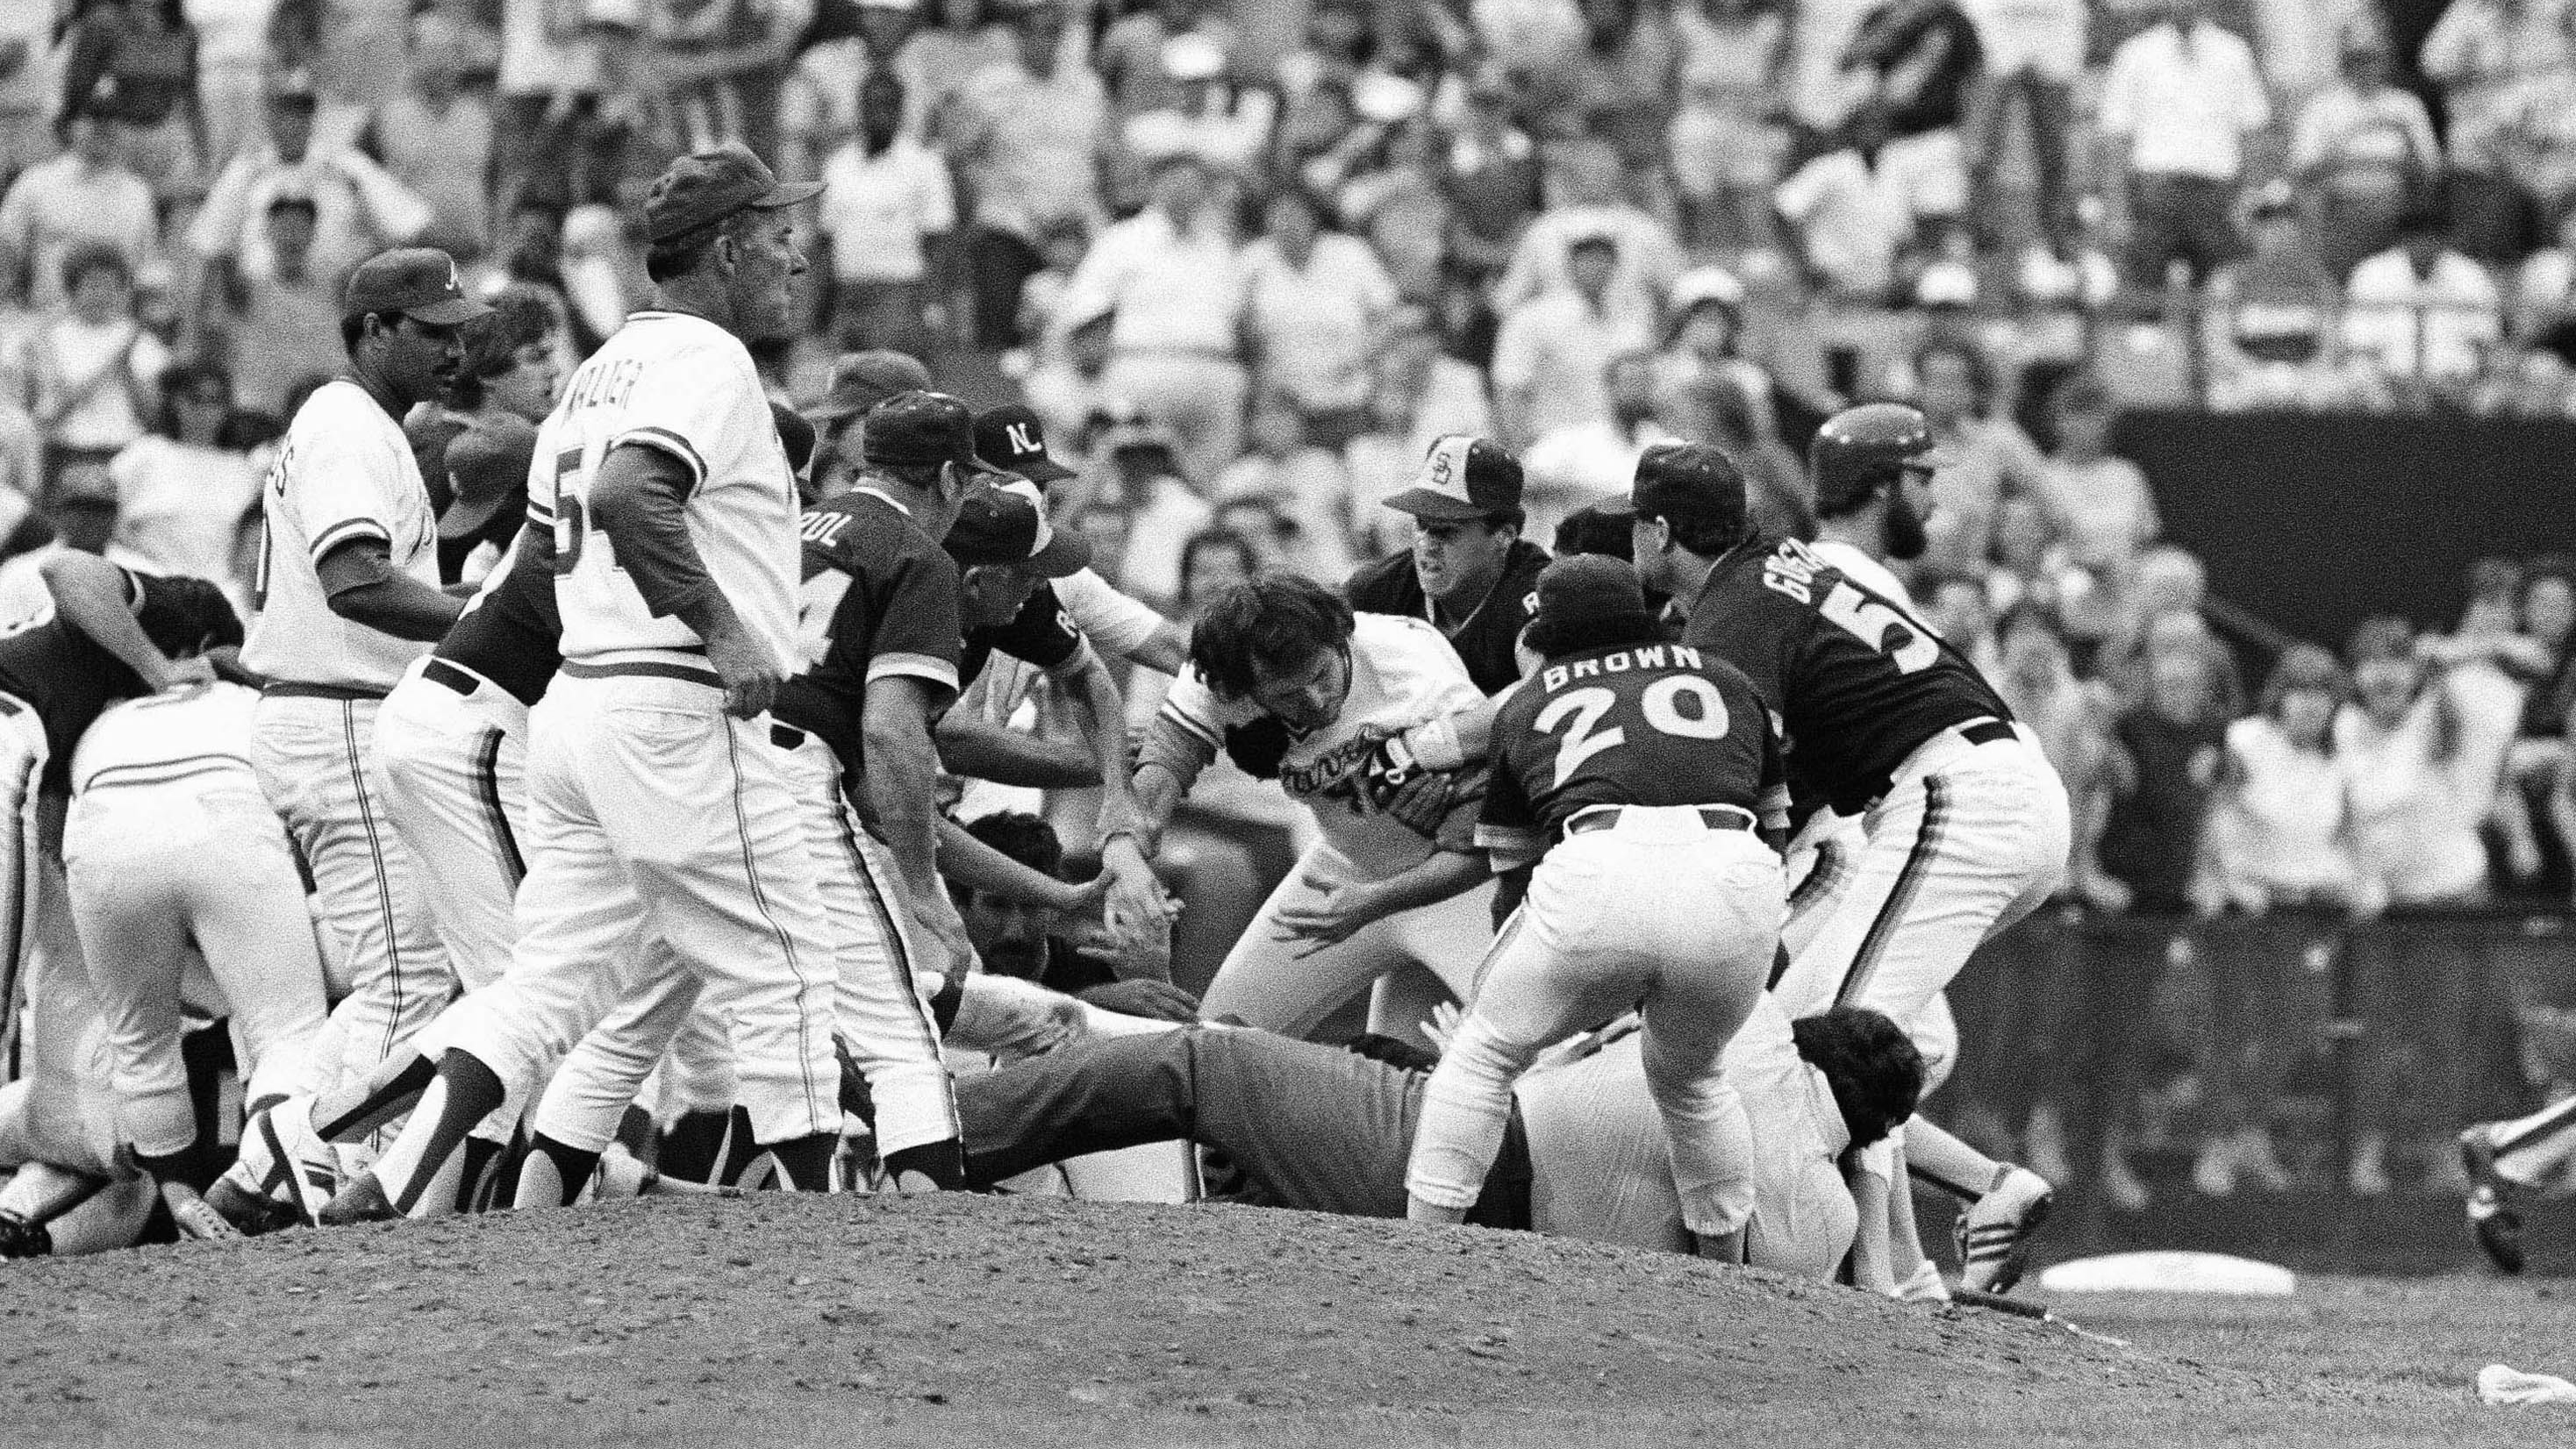 Journey back to 1984 to relive a wild MLB fight that prompted 13 ejections  and 5 arrests